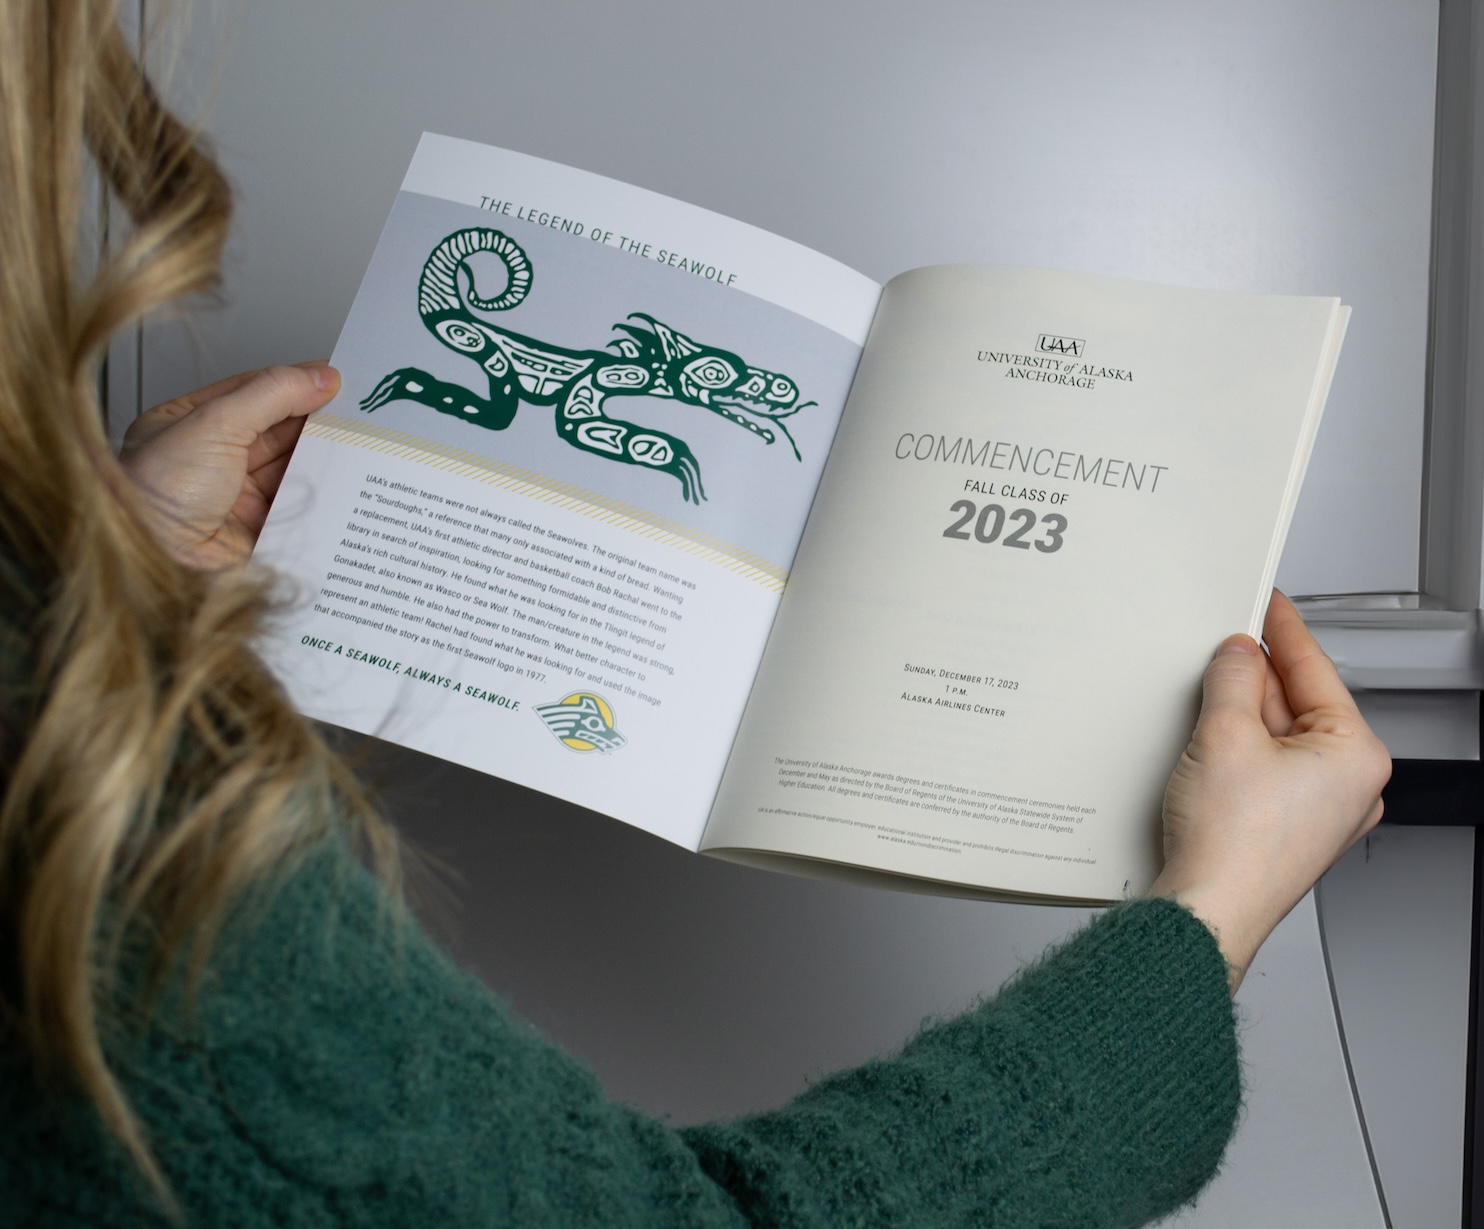 The photo is over the shoulder of a blonde woman in a green sweater. She is holding out a booklet that reads Commencement 2023. She is in a white and grey room under studio lighting.  